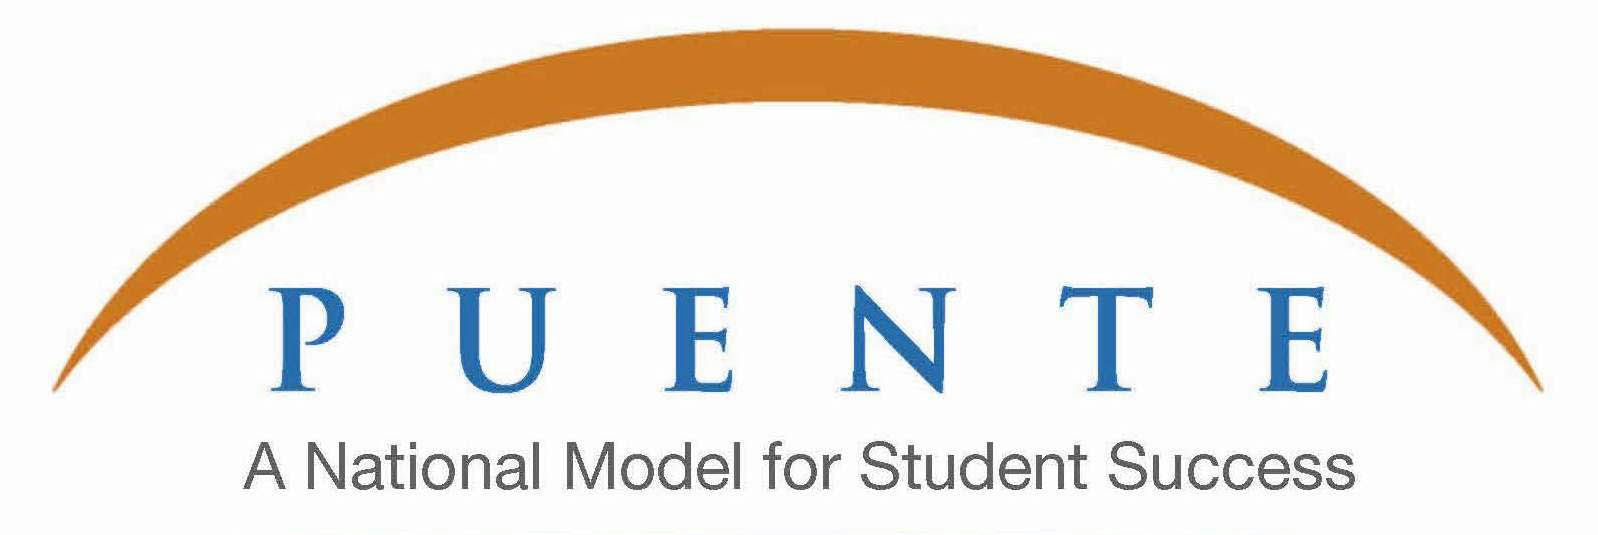 Puente A National Model for Student Success